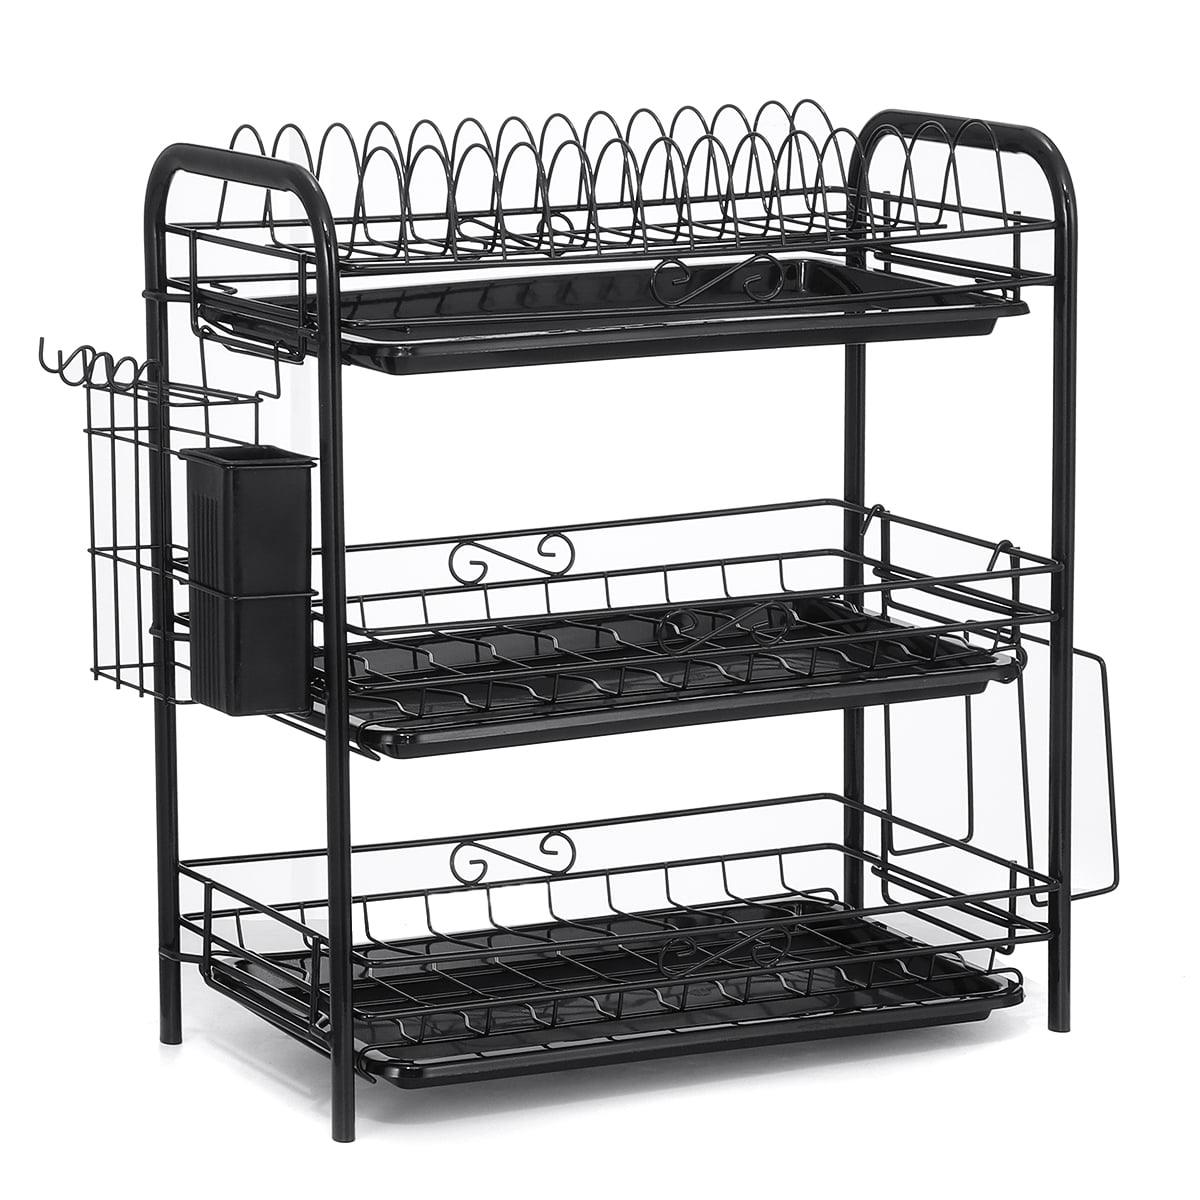 Kitchen Dish Cup Drying Rack Holder Sink Drainer 3-Tier Stainless Steel P0N2 